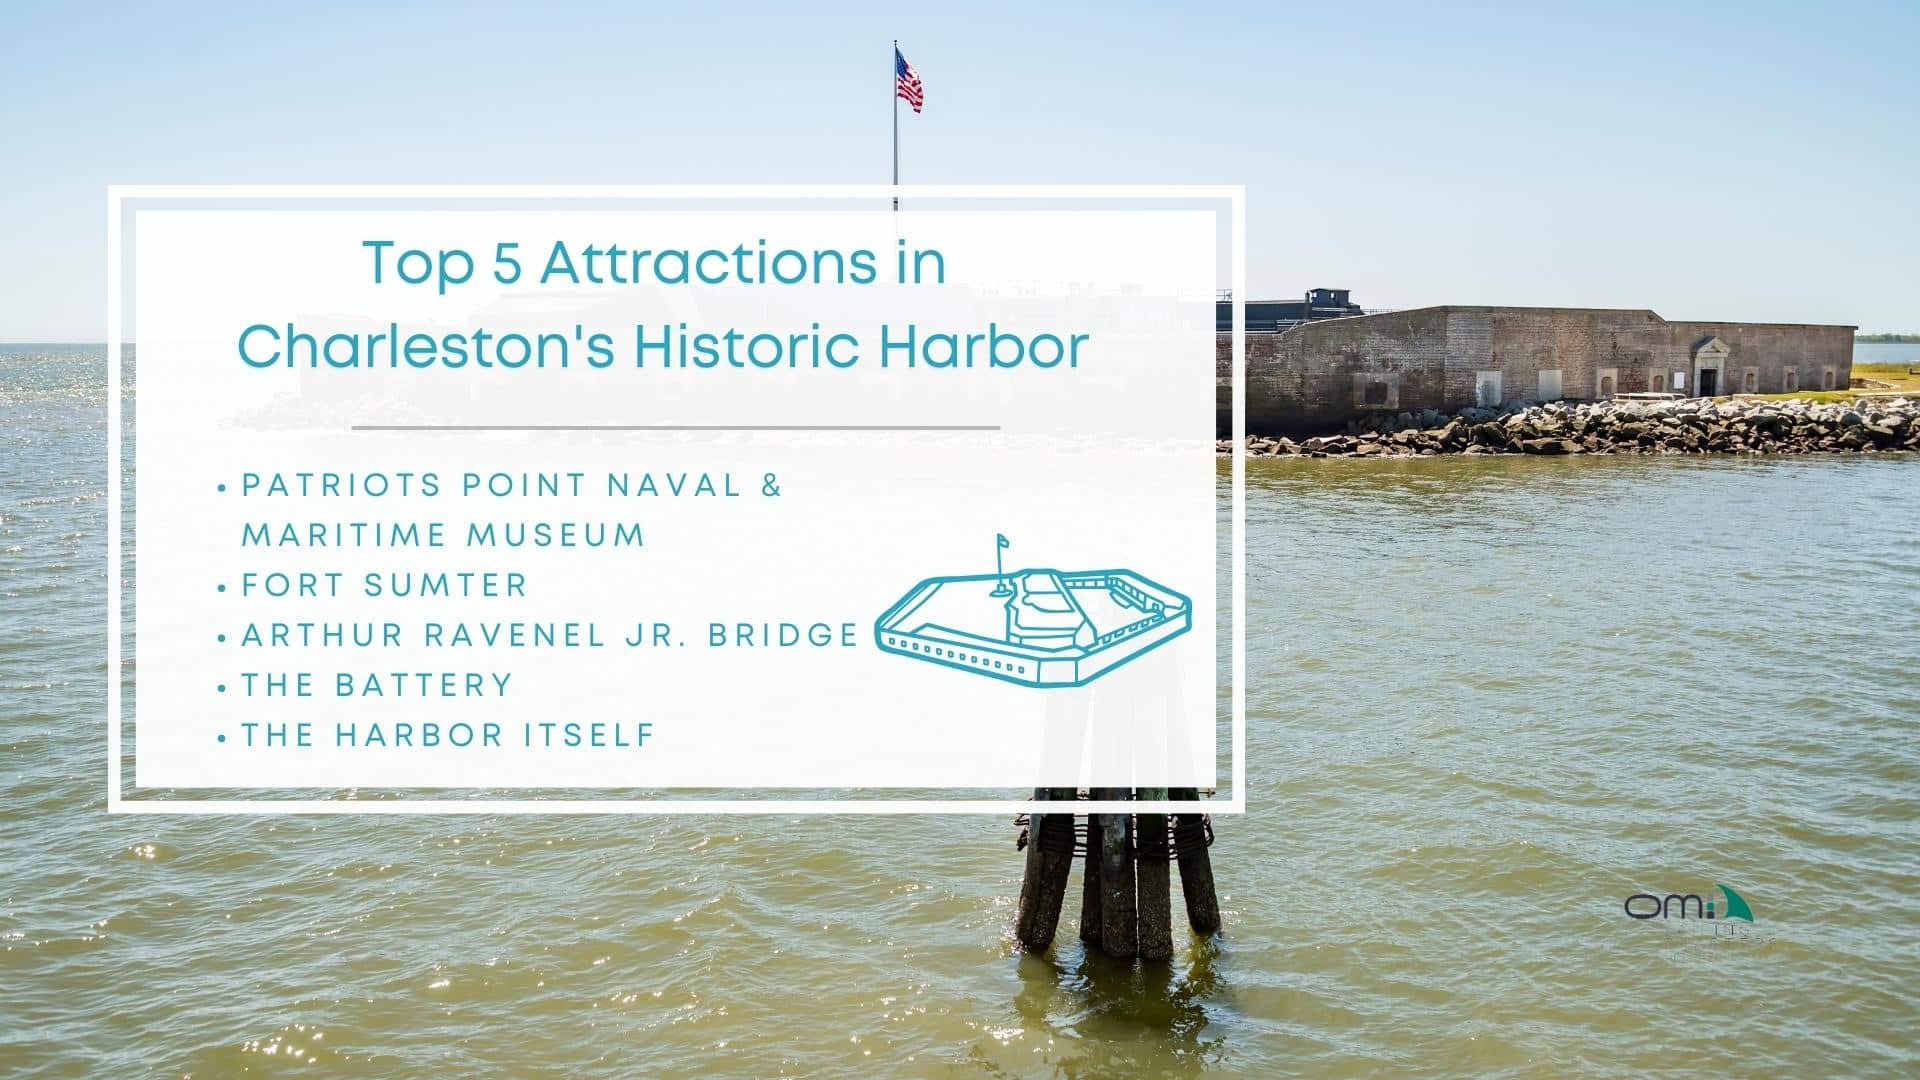 Infographic image of top 5 attractions in Charleston's historic harbor